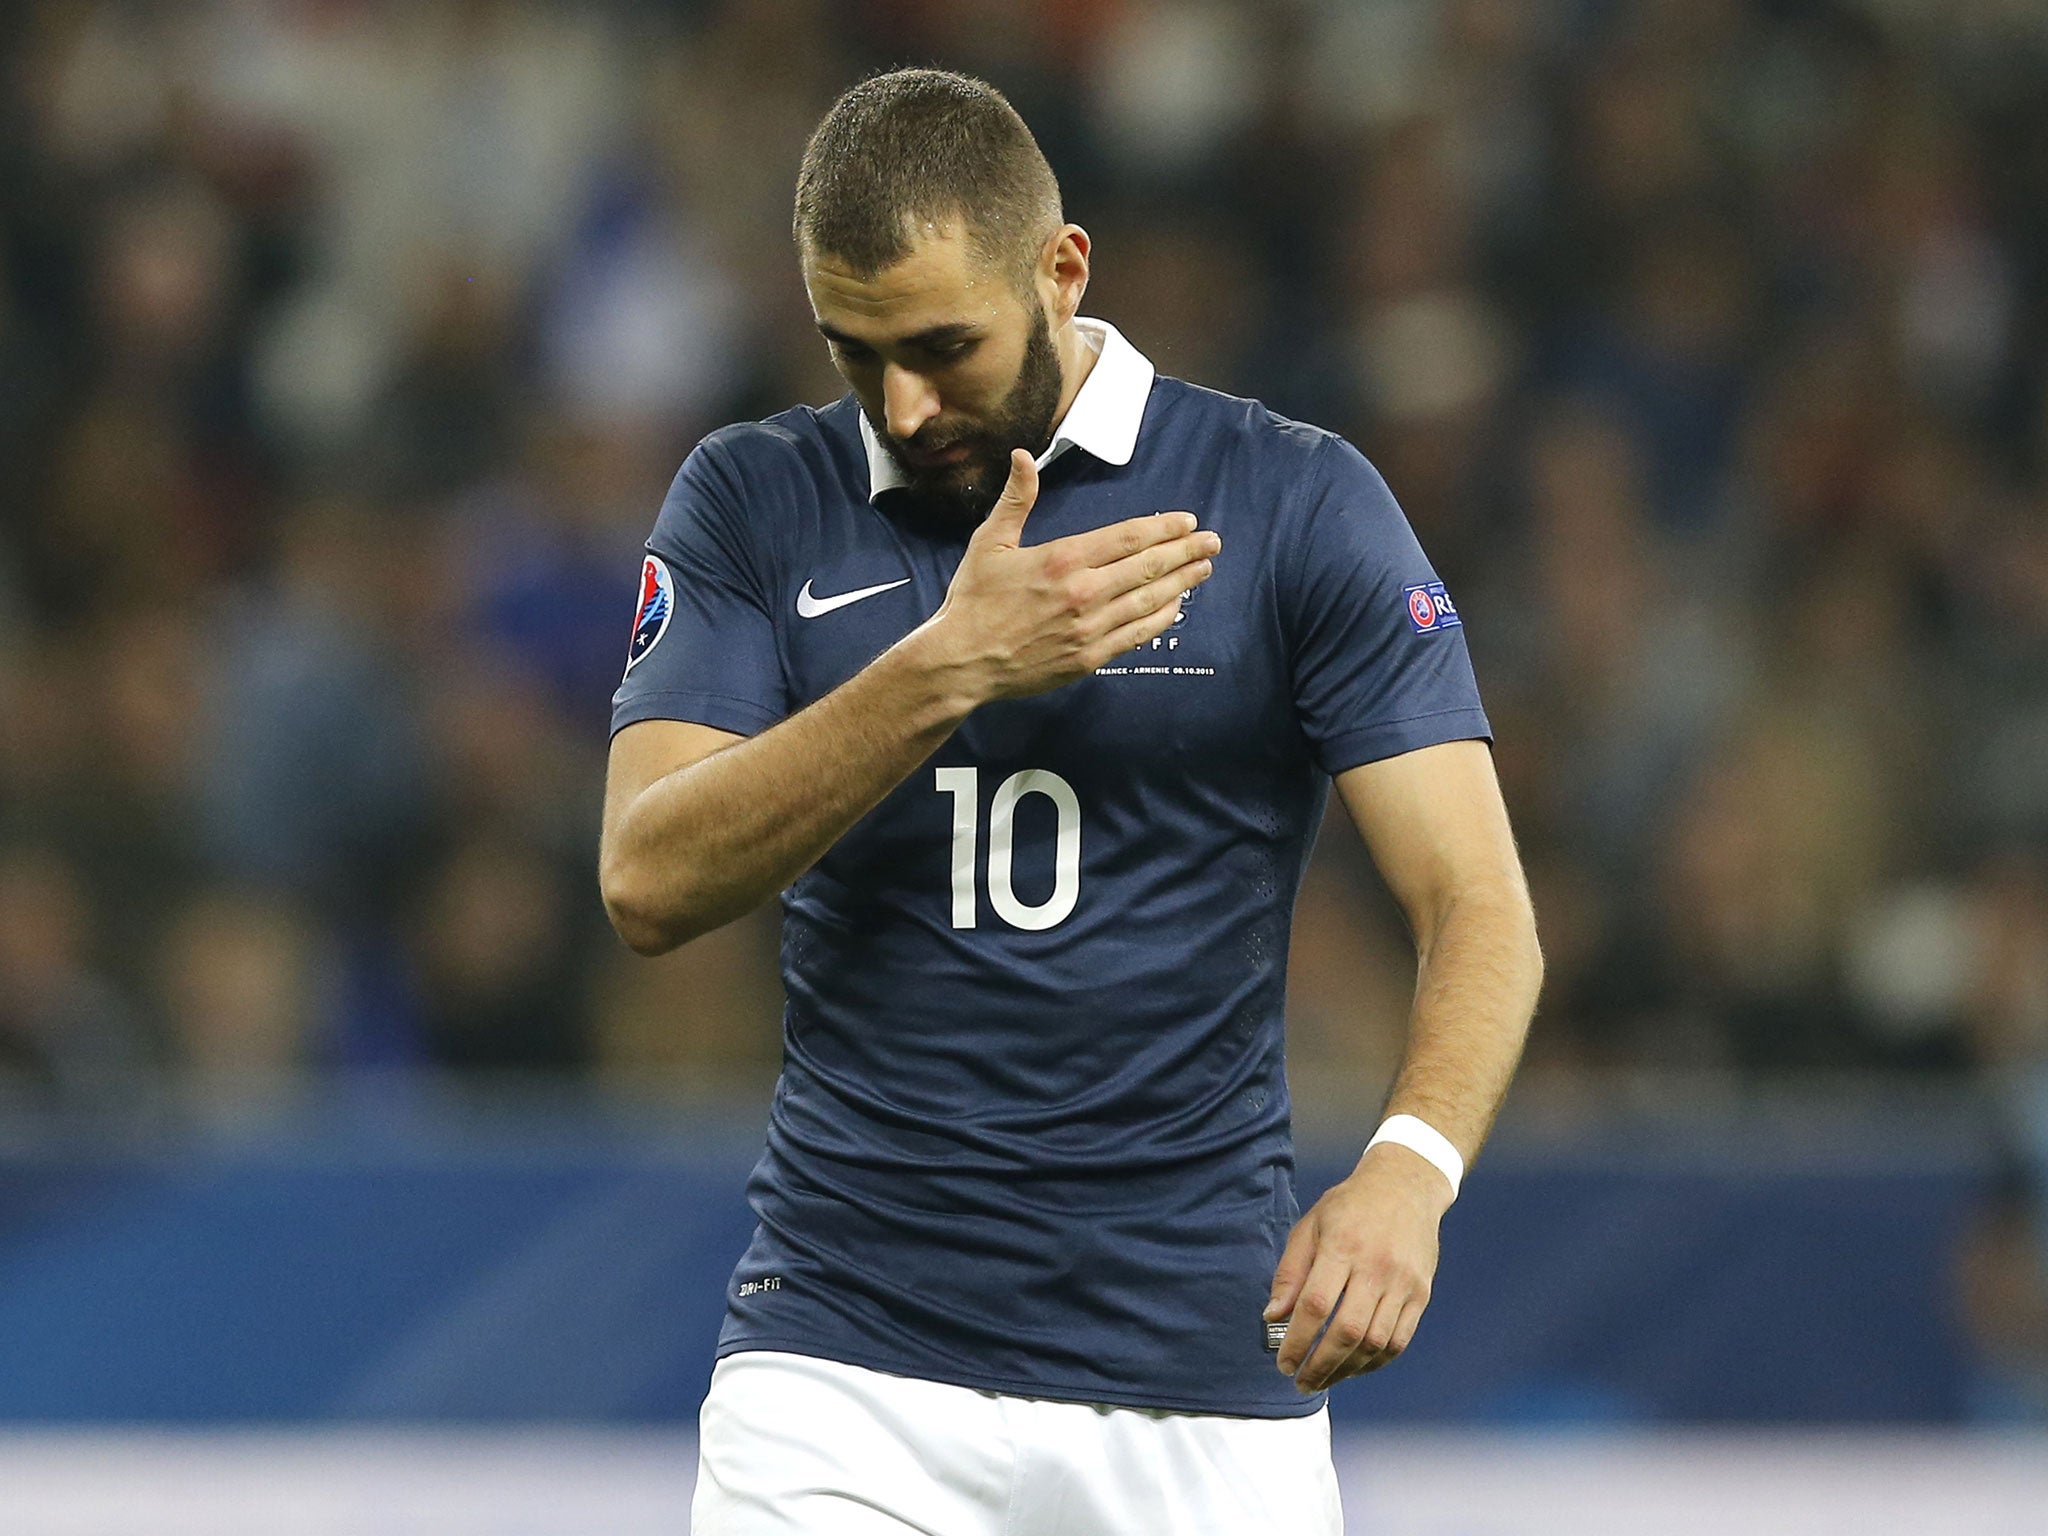 Real Madrid’s Karim Benzema, regarded as one of the finest players in the world, was not picked because he is under investigation for allegedly helping childhood friends to blackmail a France team-mate